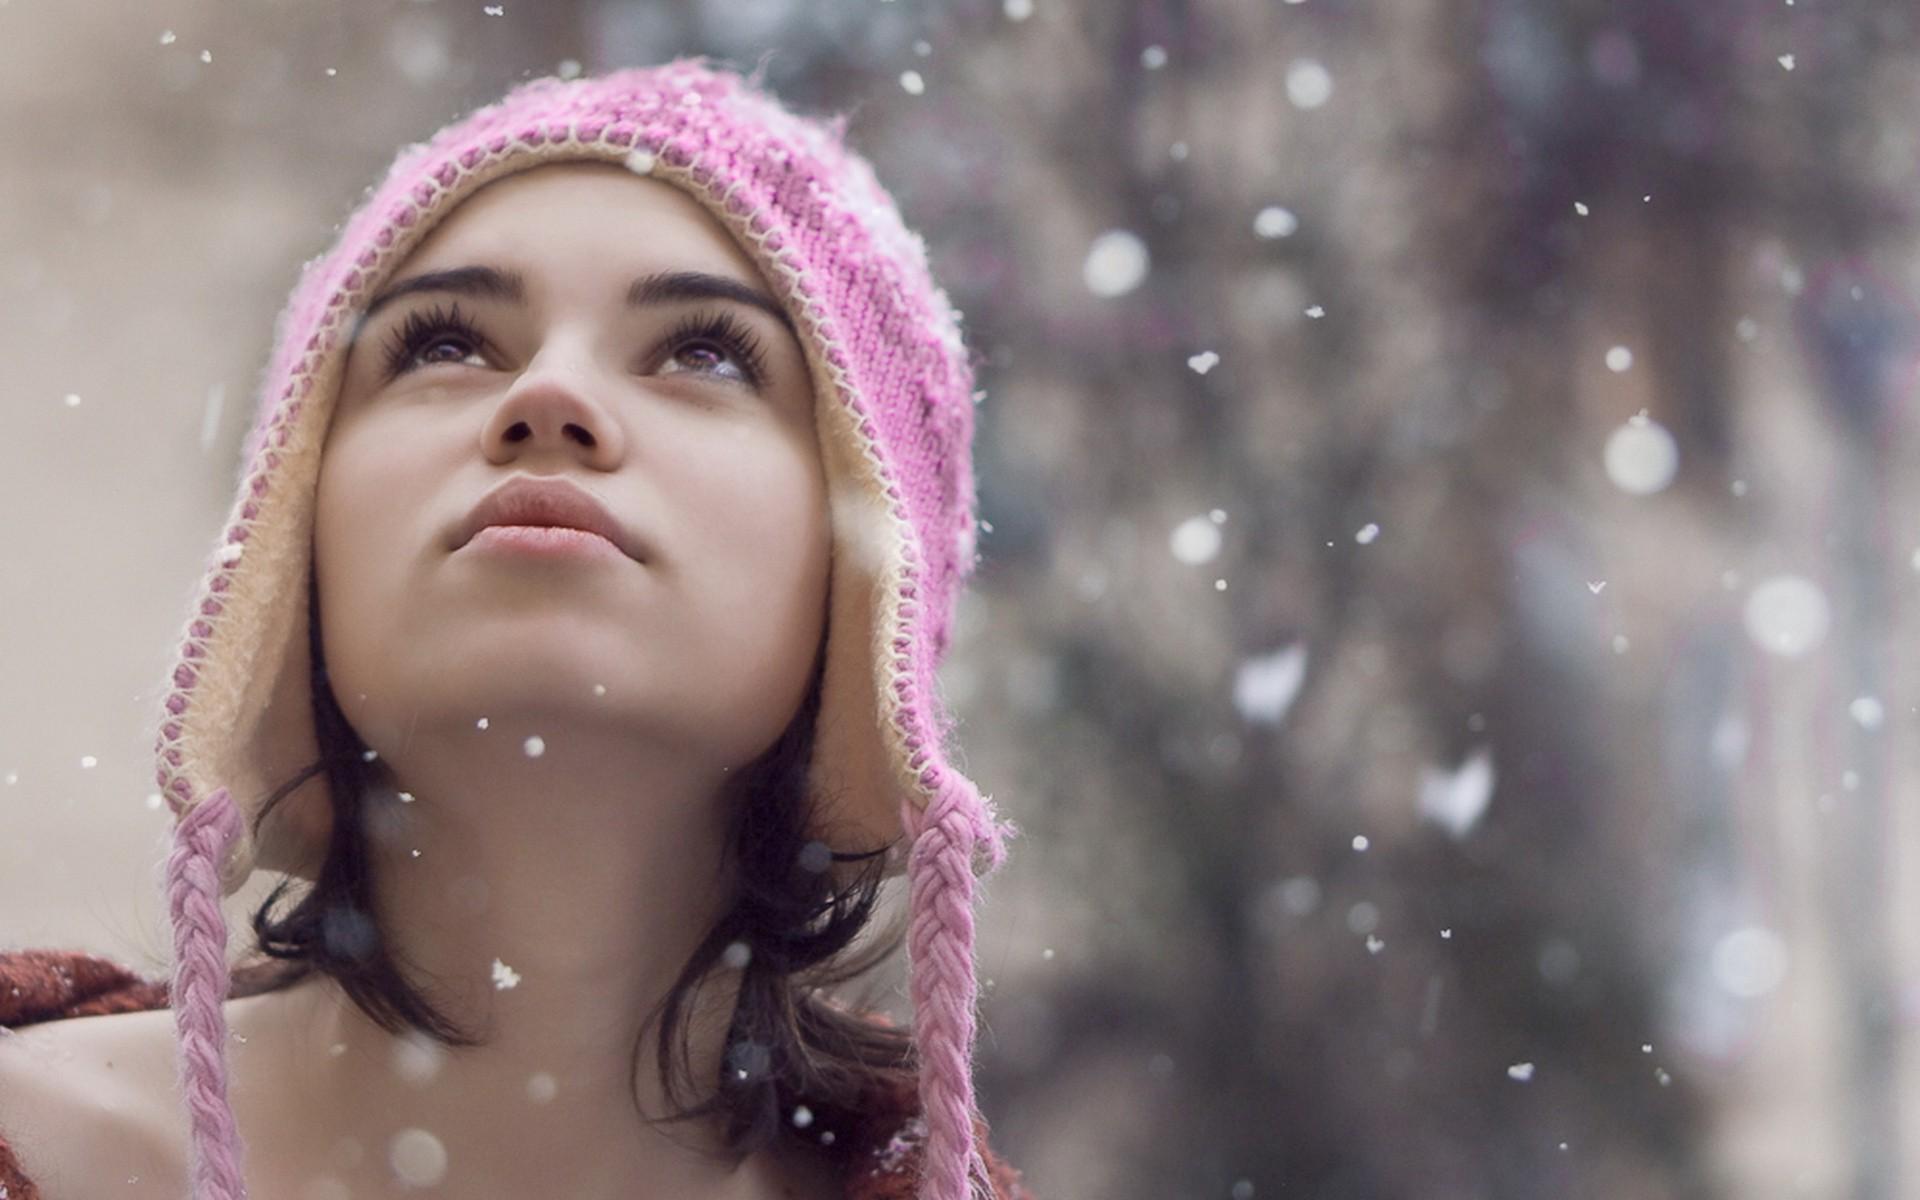 Snowflakes Falling on Girl's Face widescreen wallpaper. Wide